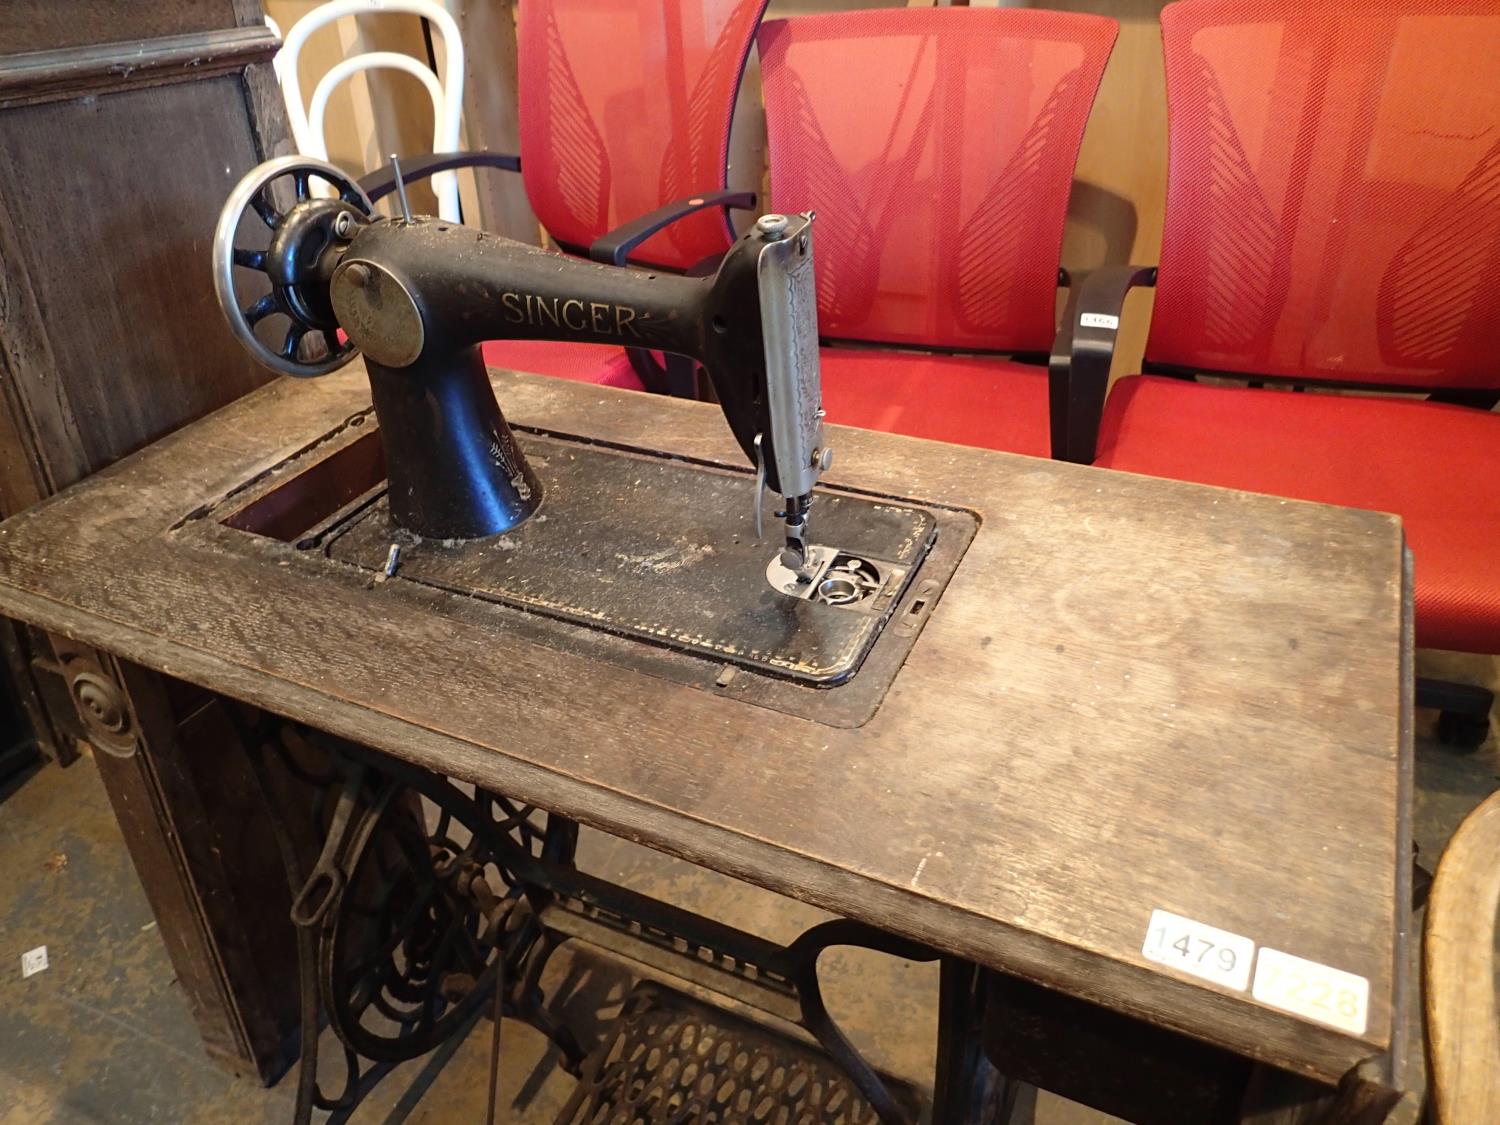 Vintage Singer sewing machine on cast metal base. Not available for in-house P&P, contact Paul O'Hea